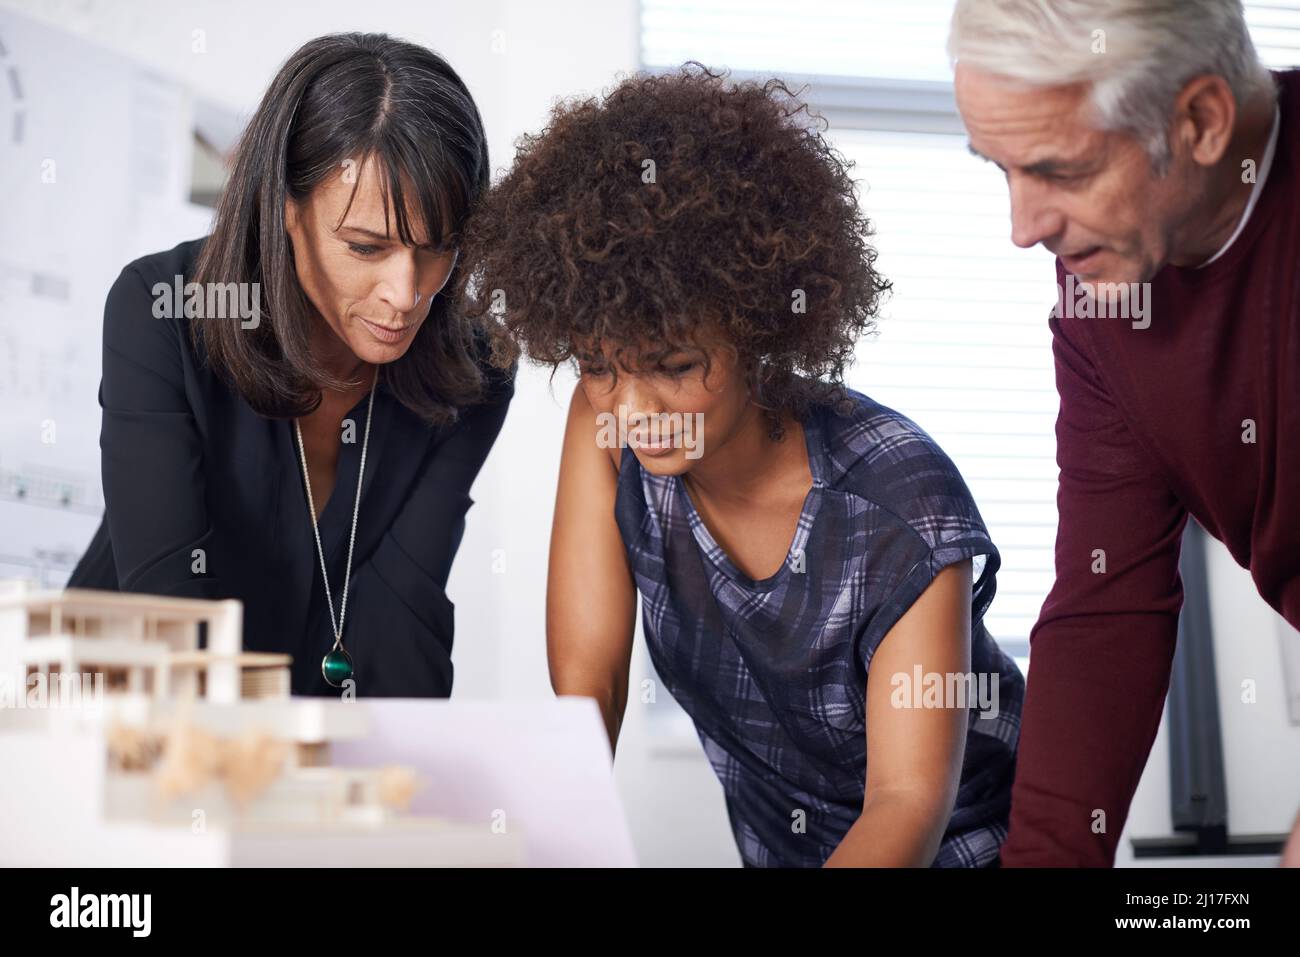 Touching up our prototype. Shot of three architects discussing an architectural model in the workplace. Stock Photo